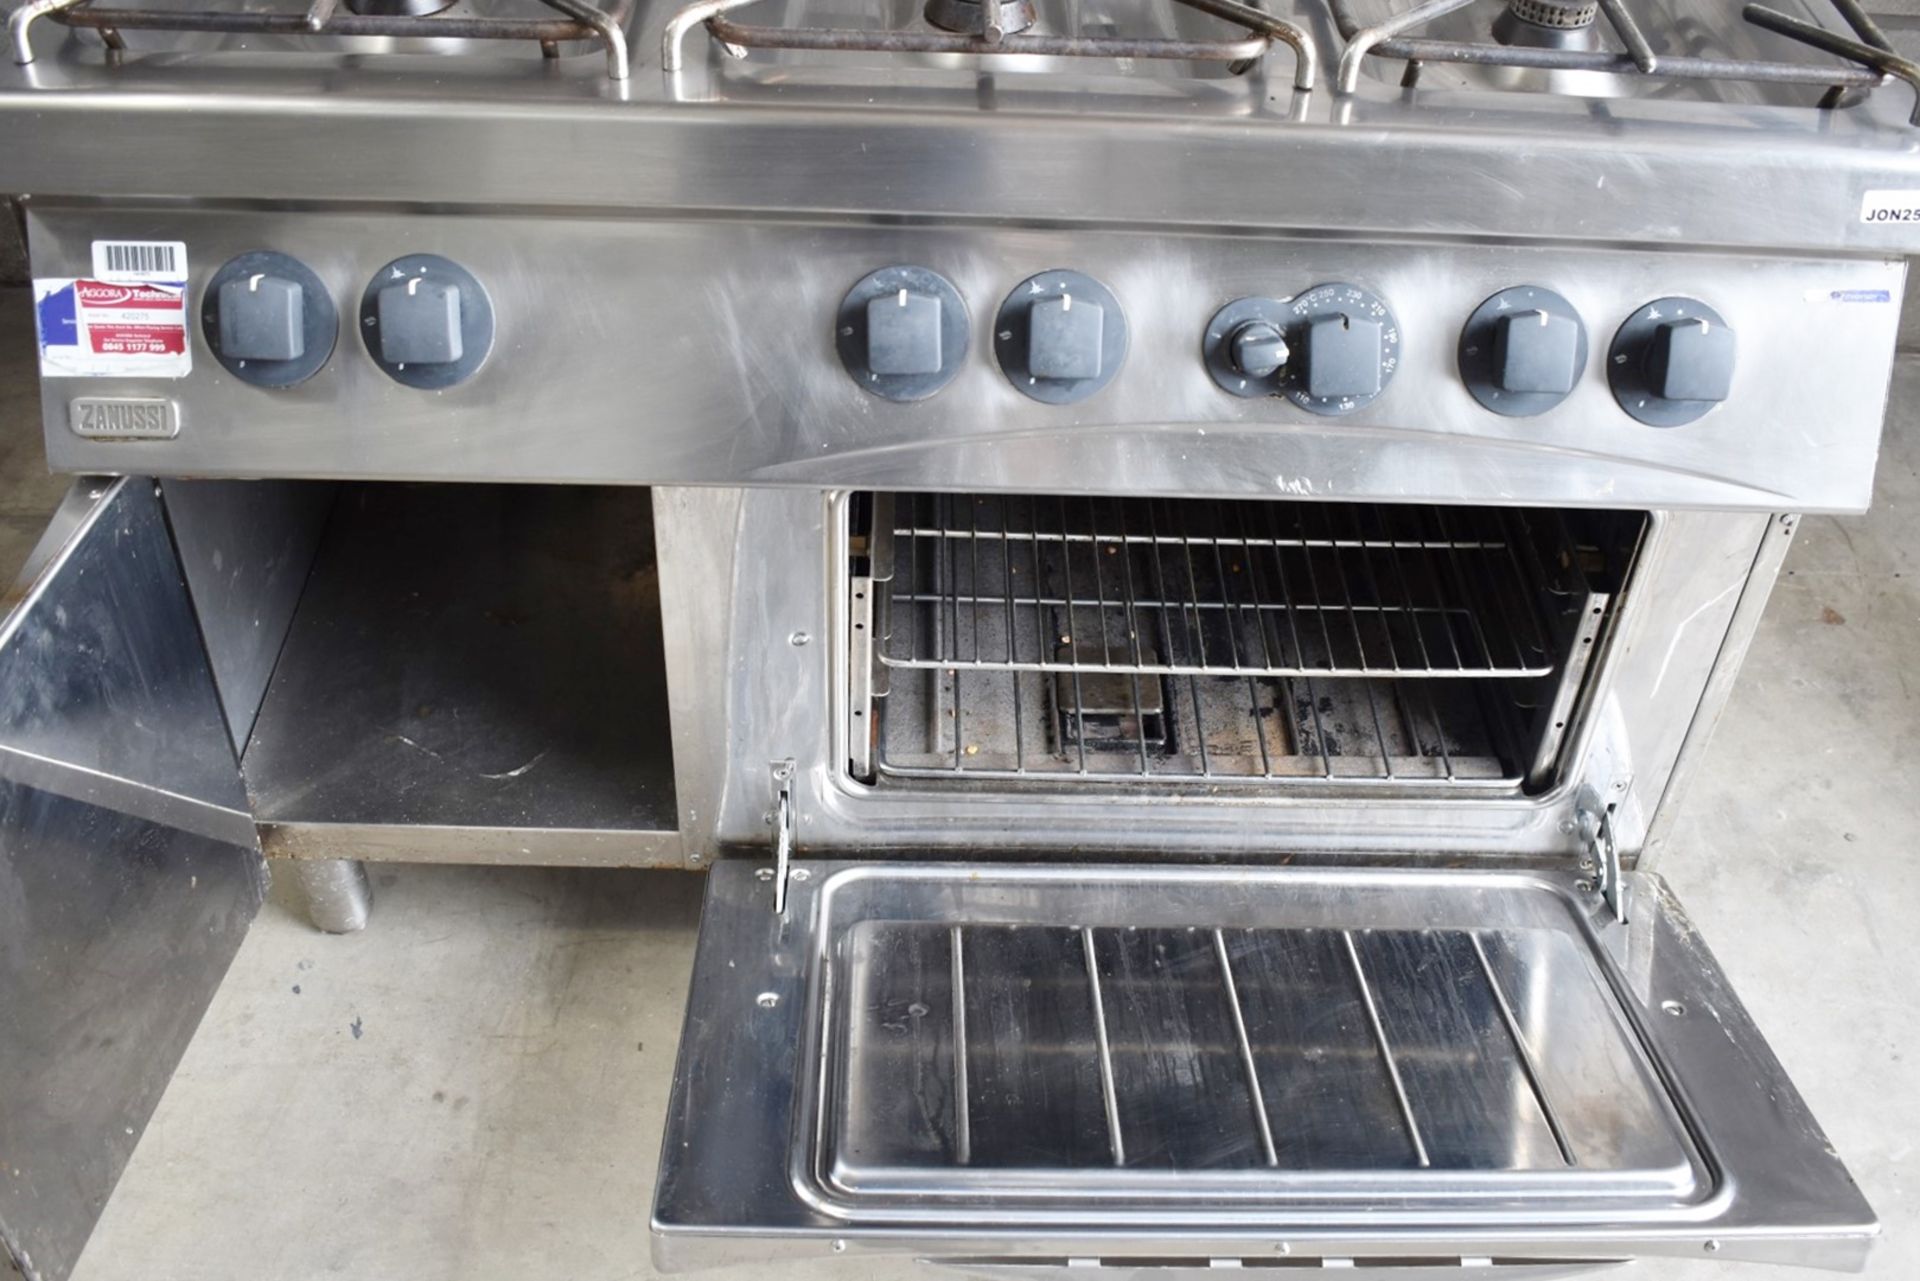 1 x Zanussi 6 Burner Gas Range Cooker with a Stainless Steel Exterior - Image 5 of 18